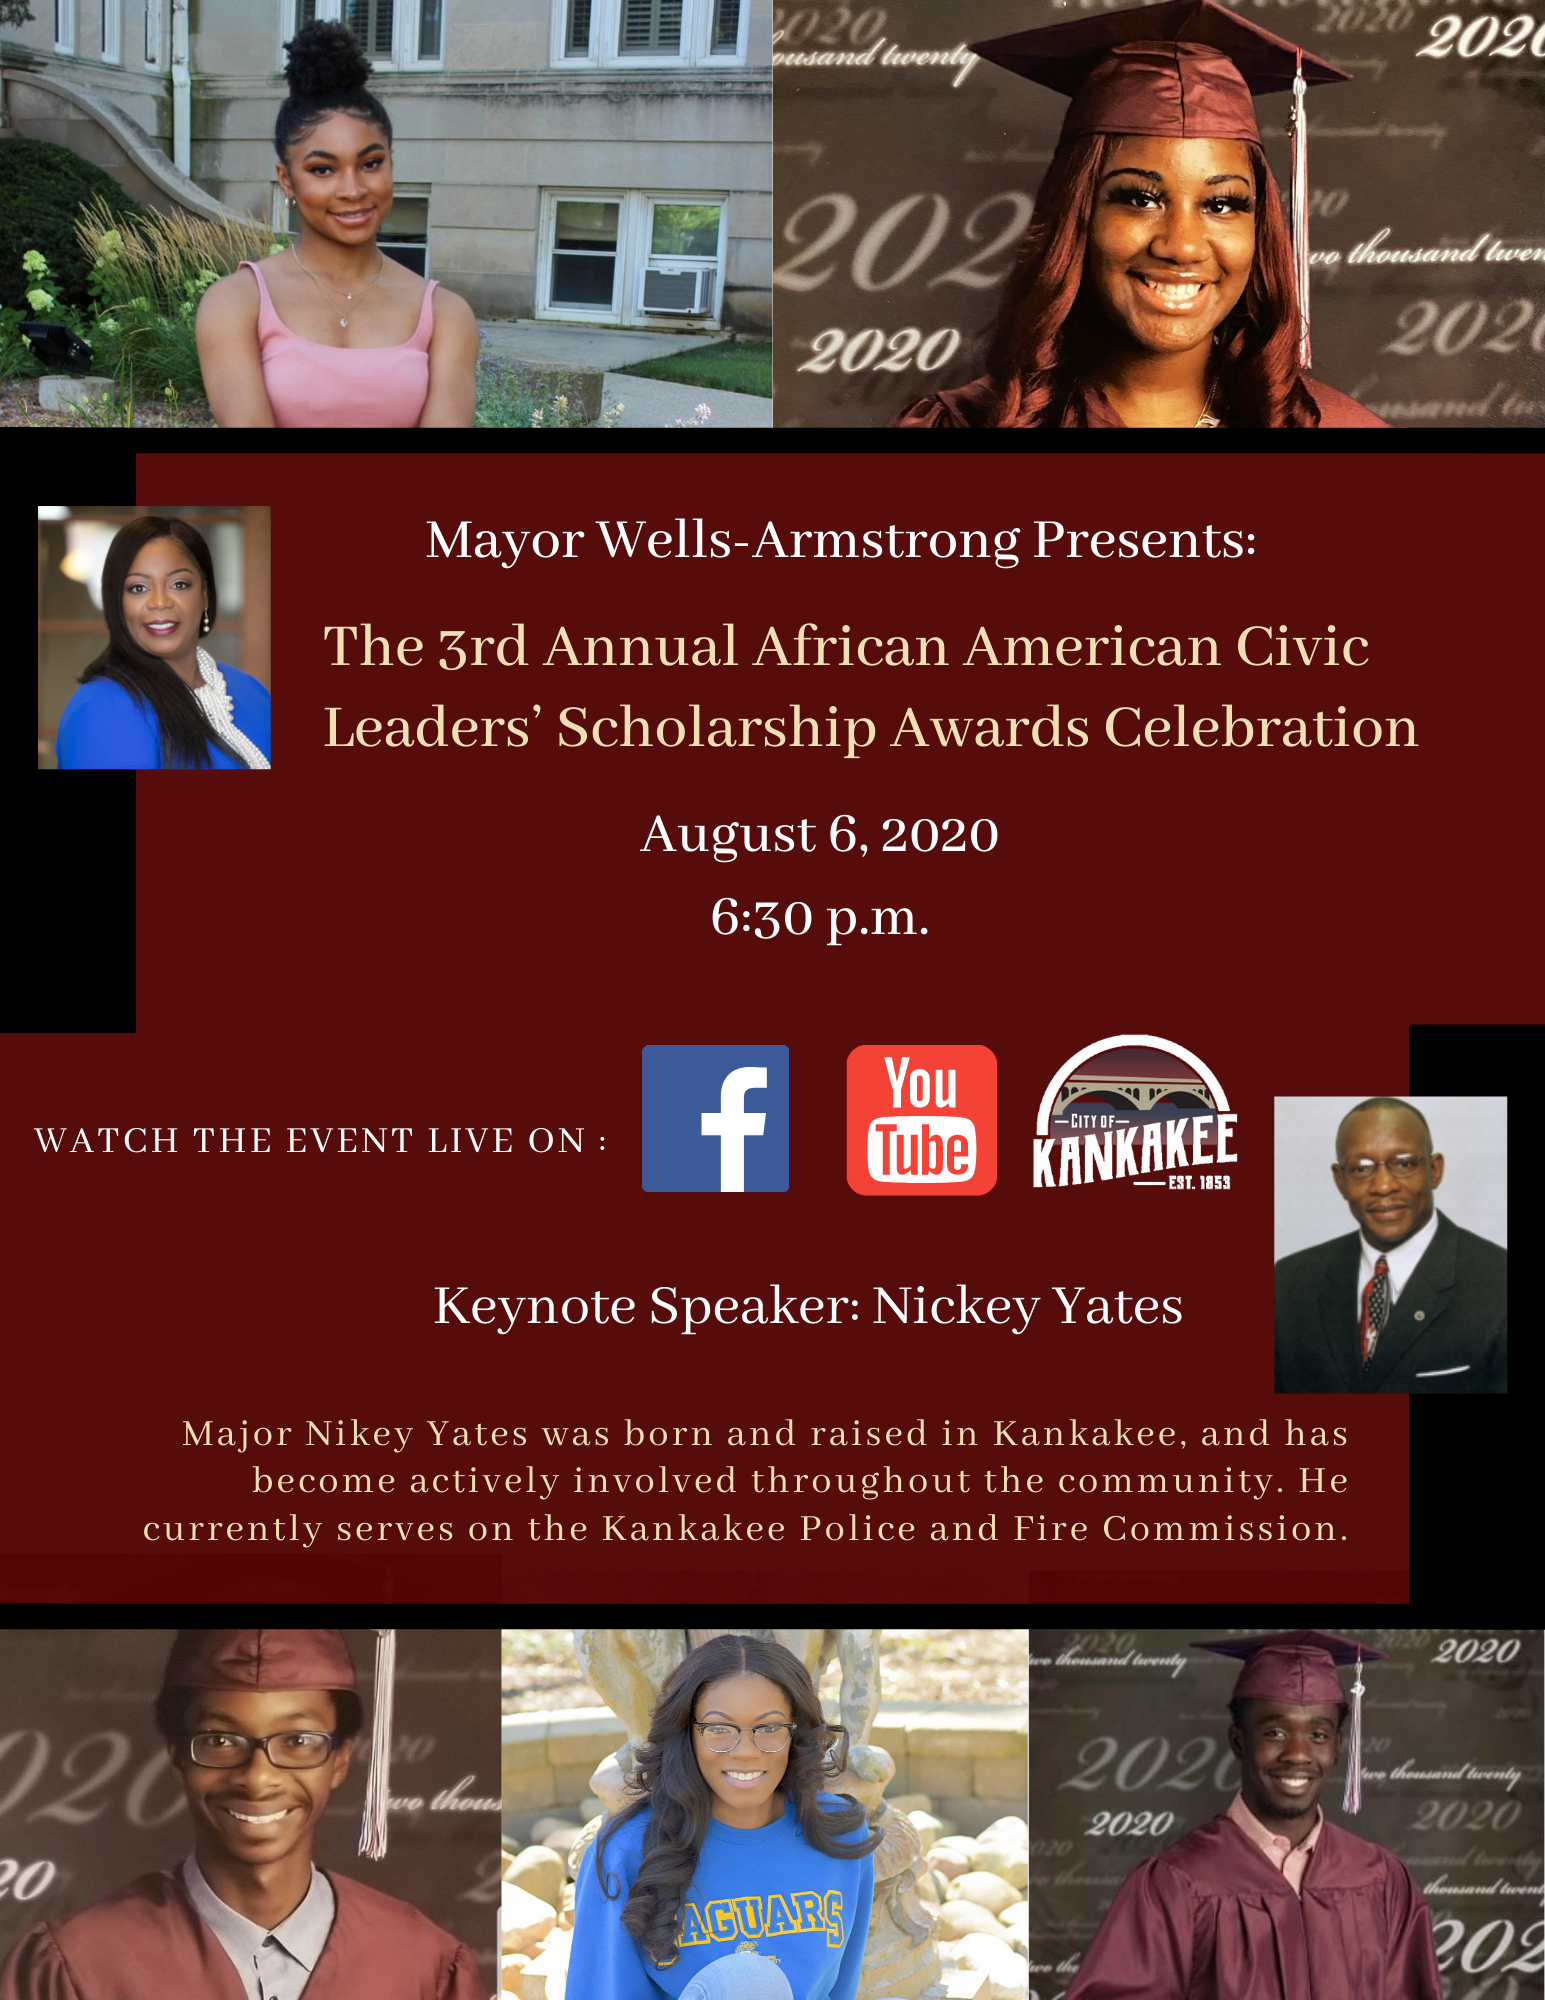 Mayor Wells-Armstrong Presents: The 3rd Annual African American Civic Leaders' Scholarship Awards Celebration